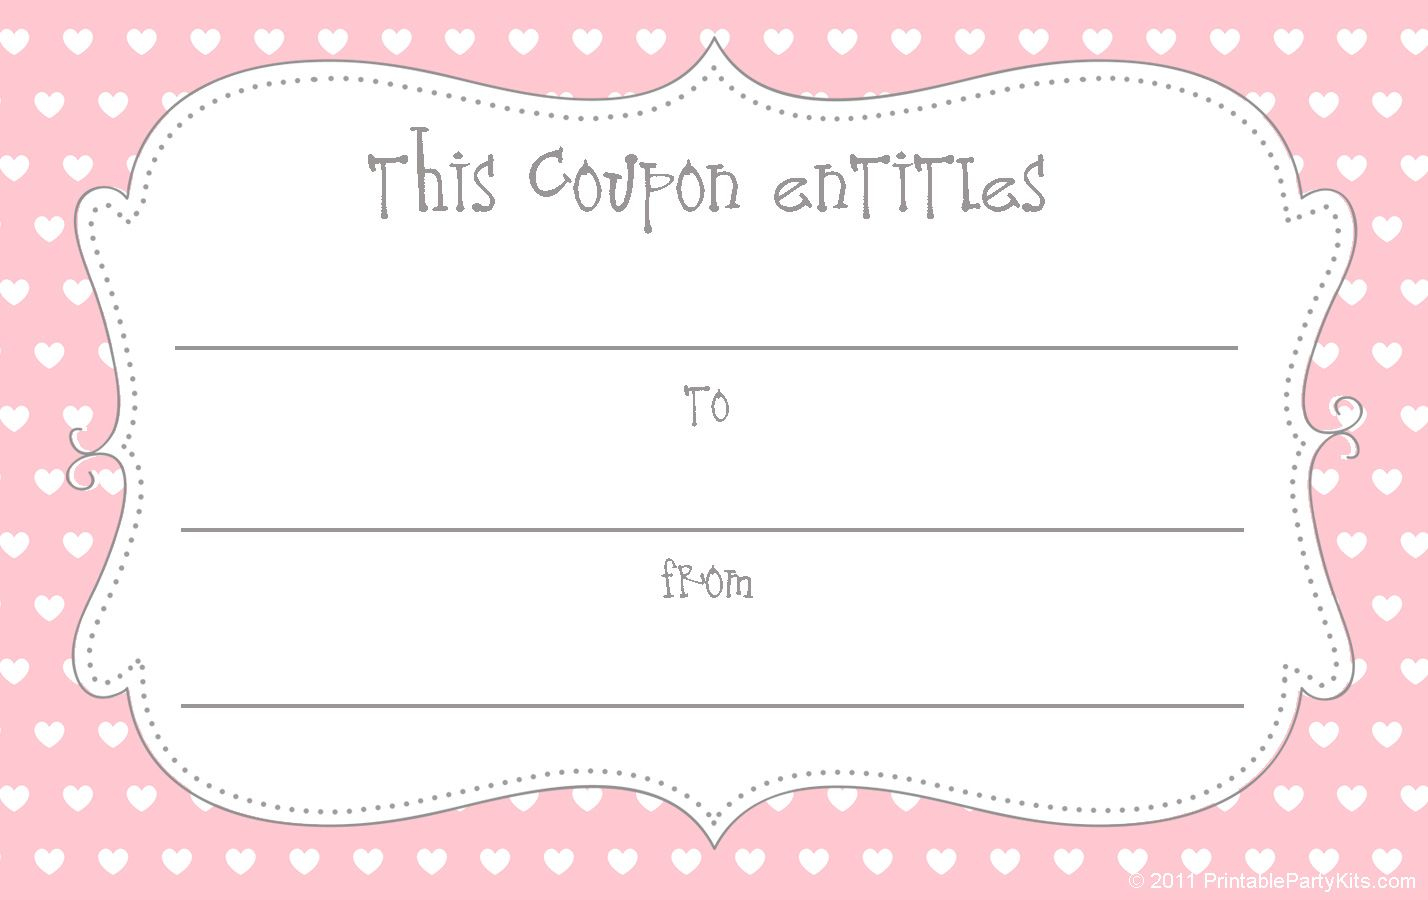 12 Sets Of Free Printable Love Coupons And Templates - Free Printable Love Coupons Blank